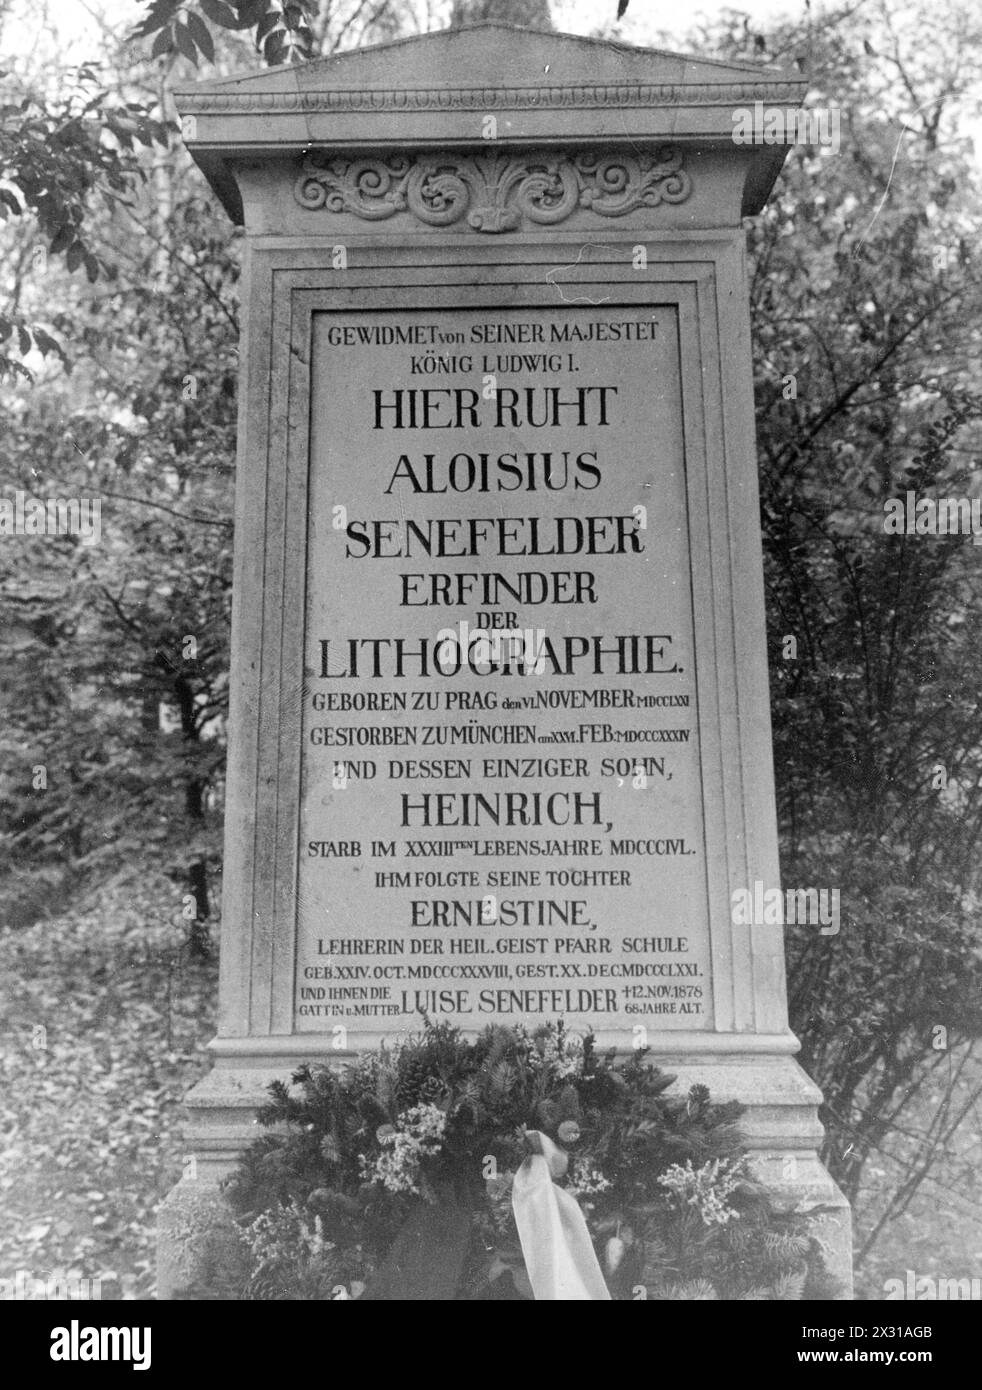 Senefelder, Alois, 6.11.1771 - 26.2.1834, Austrian printer and inventor, family grave, ADDITIONAL-RIGHTS-CLEARANCE-INFO-NOT-AVAILABLE Stock Photo